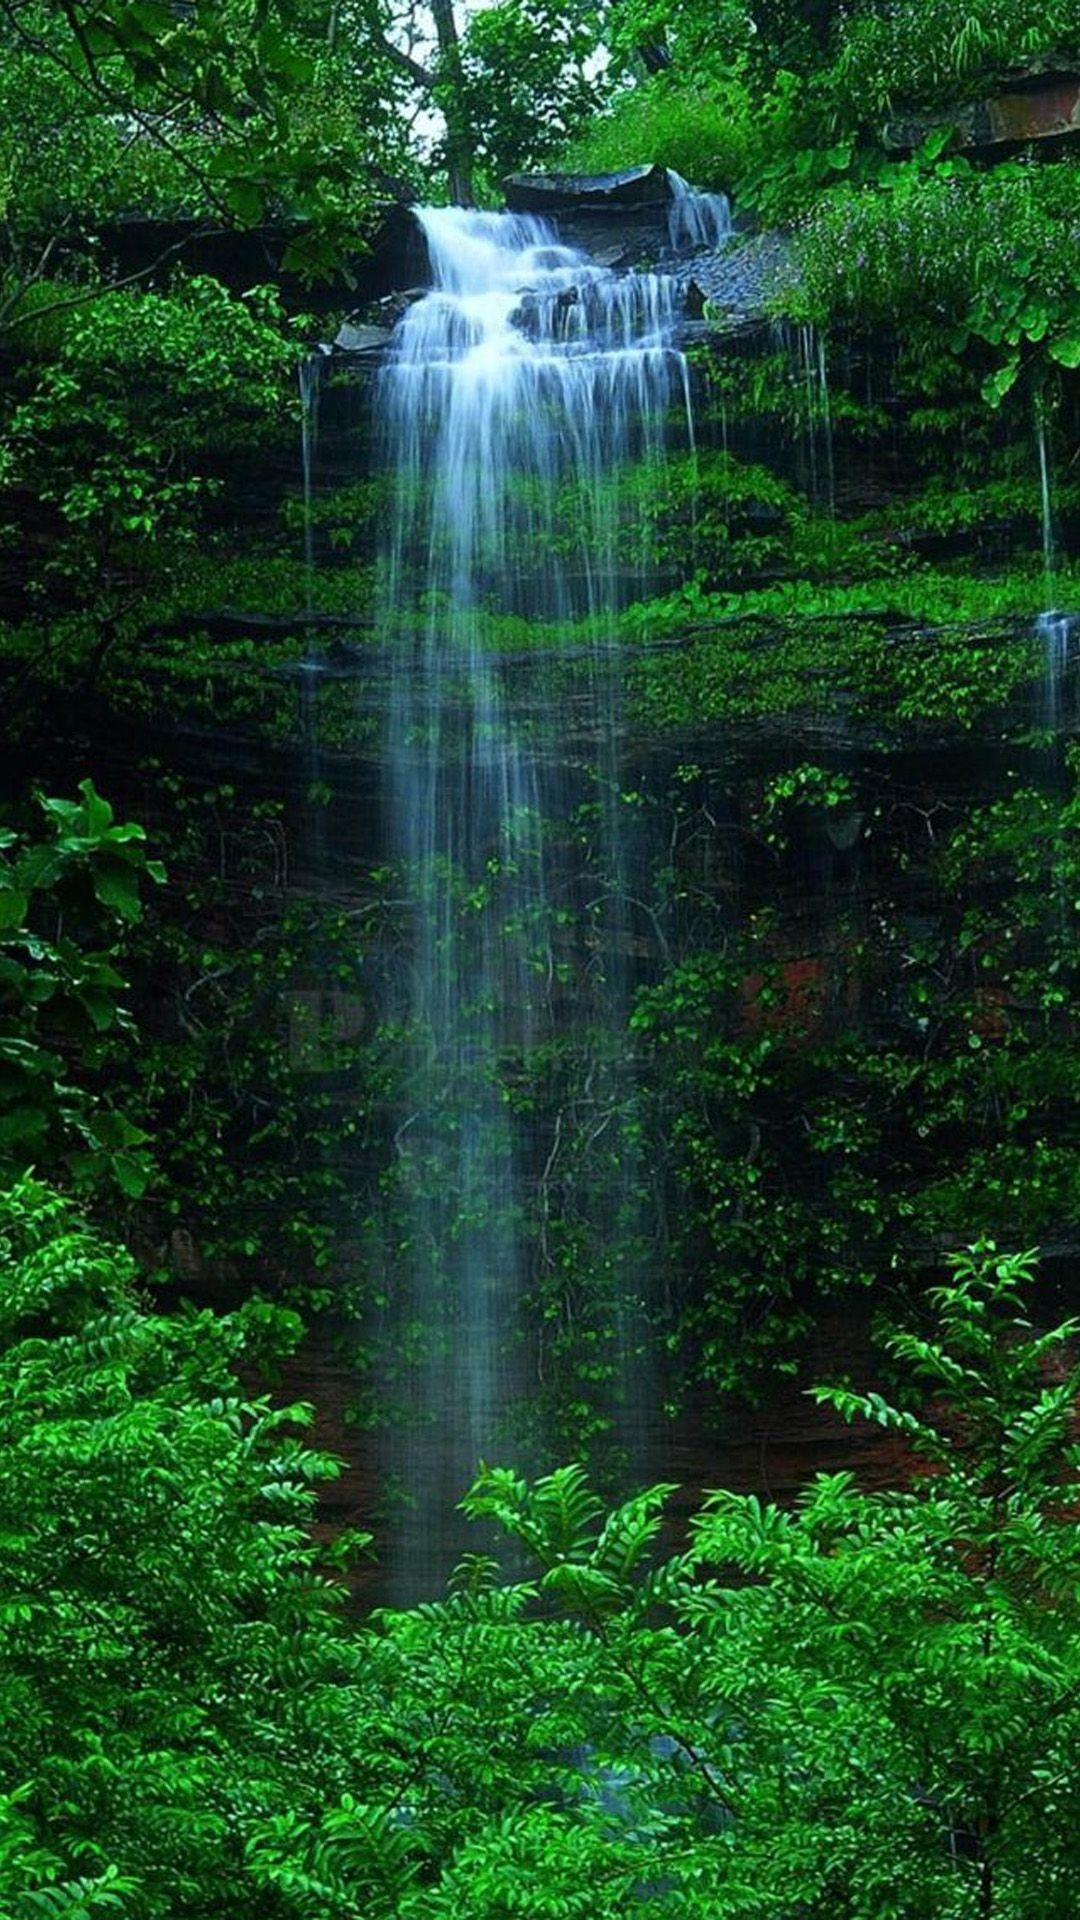 Nature Forest Waterfall IPhone 6 Wallpaper Download. IPhone Wallpaper, IPad Wallpaper One Stop Download. Waterfall Wallpaper, Forest Waterfall, Waterfall